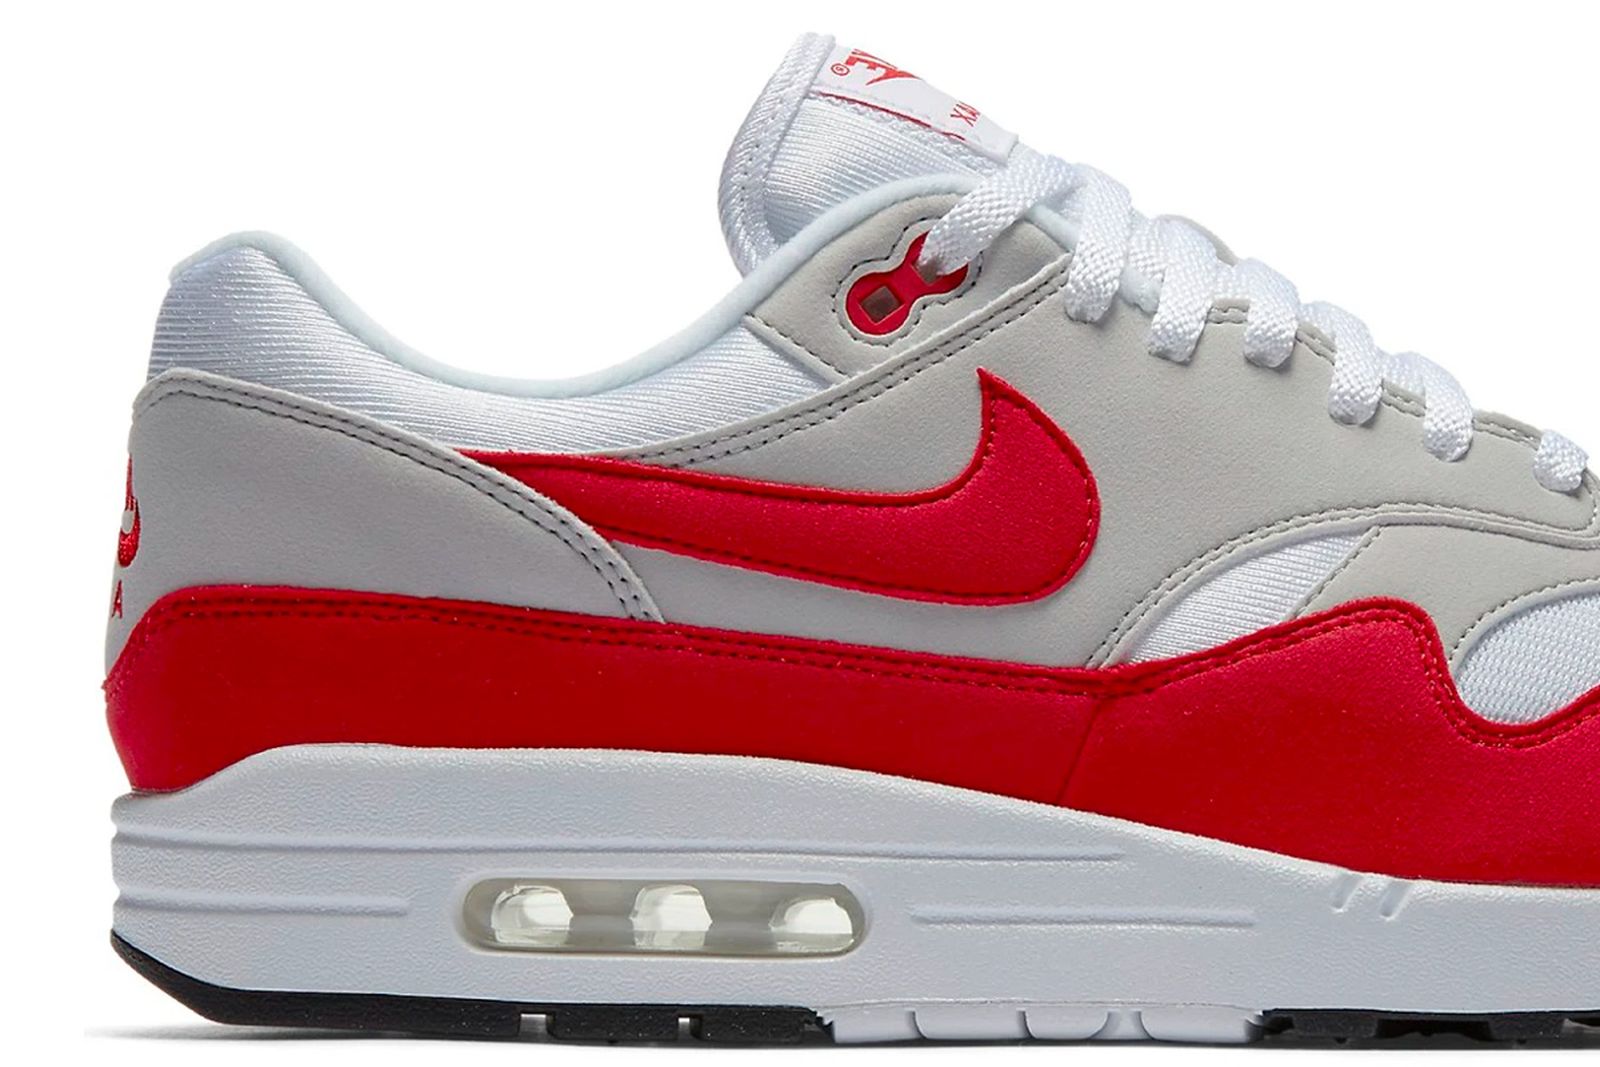 11 Of The Best Nike Air Max 1 Colorways To Wear In 2021